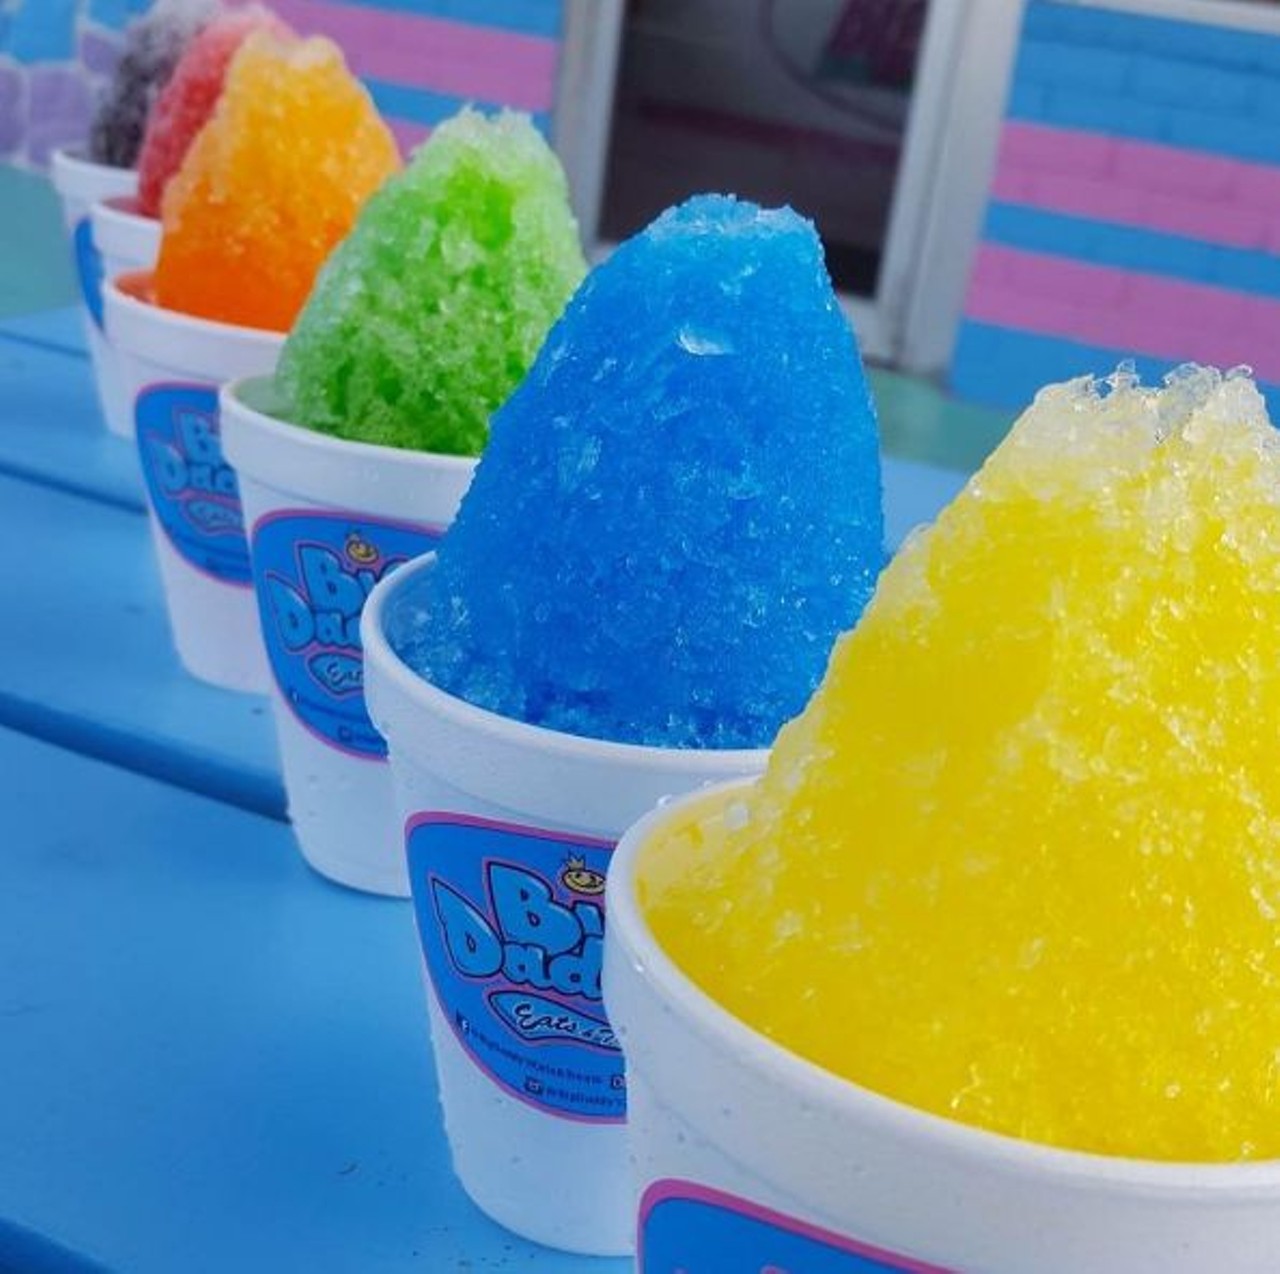 Grab a raspa downtown
Multiple locations, facebook.com/BigDaddysEatsTreats
Go with the classic style or one of Big Daddy&#146;s more crazy concoctions.
Photo via Instagram, bigdaddys210